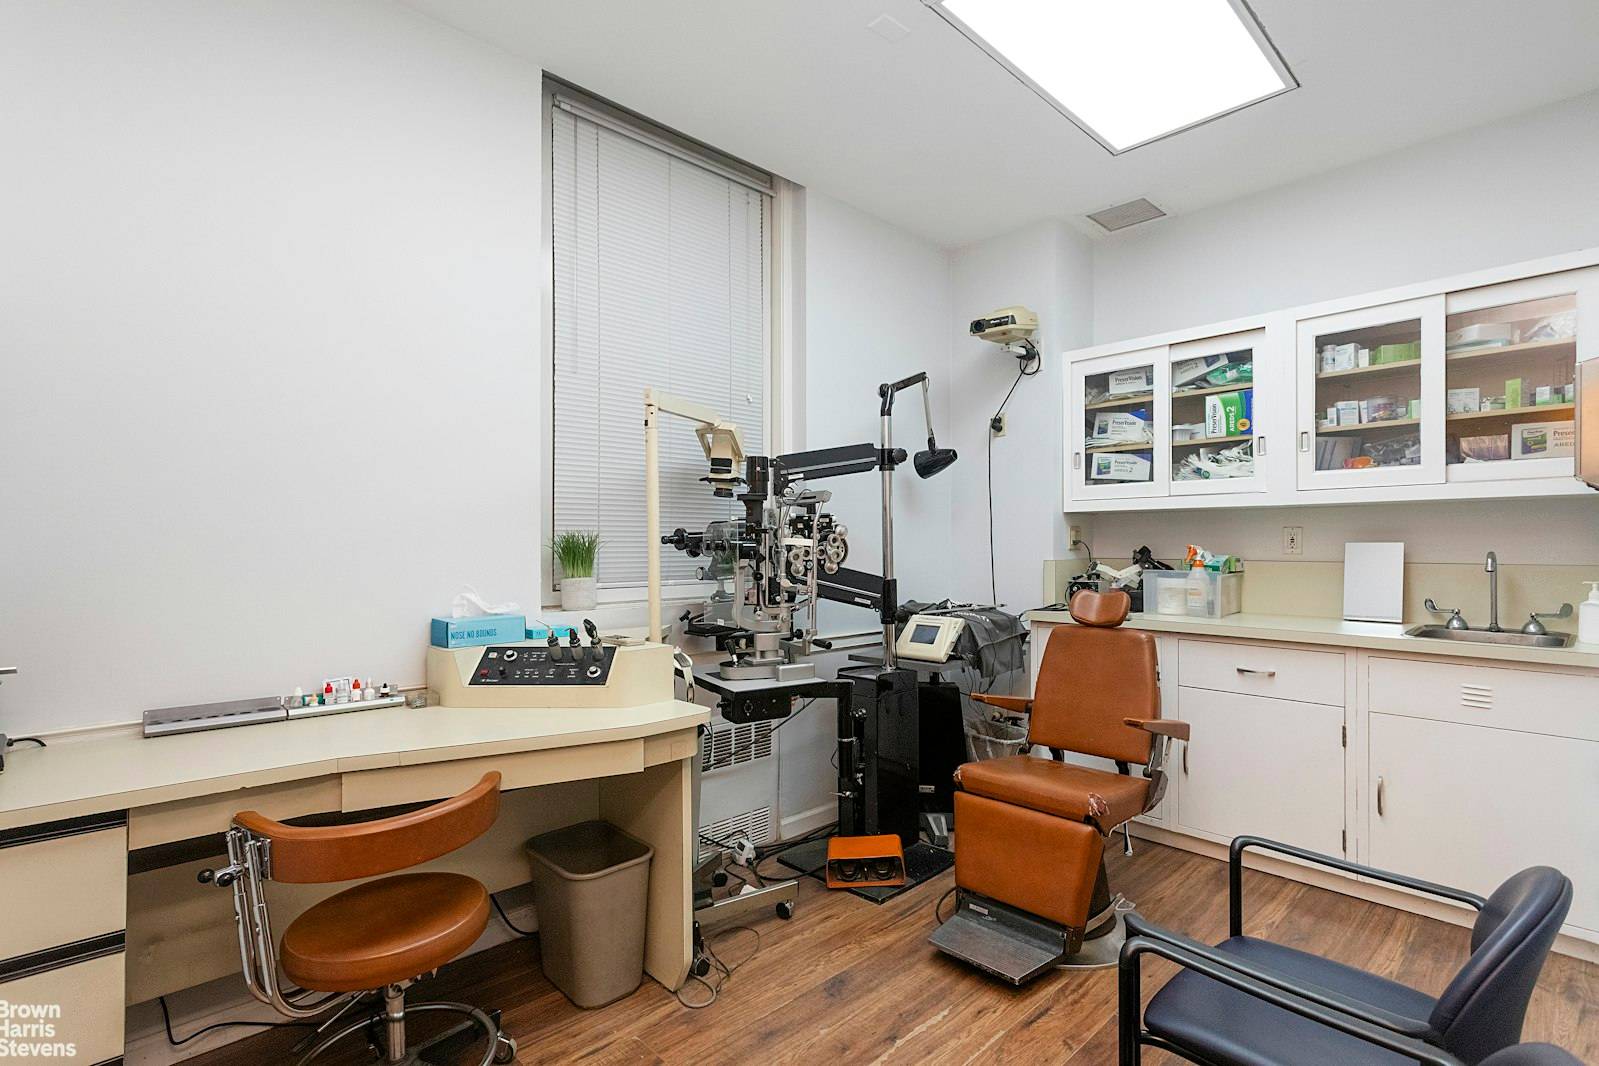 On the medical office Street of dreams, Fifth Avenue, directly across from Central PArk is a well priced fully functional office, perfect for a multitude of specialties.